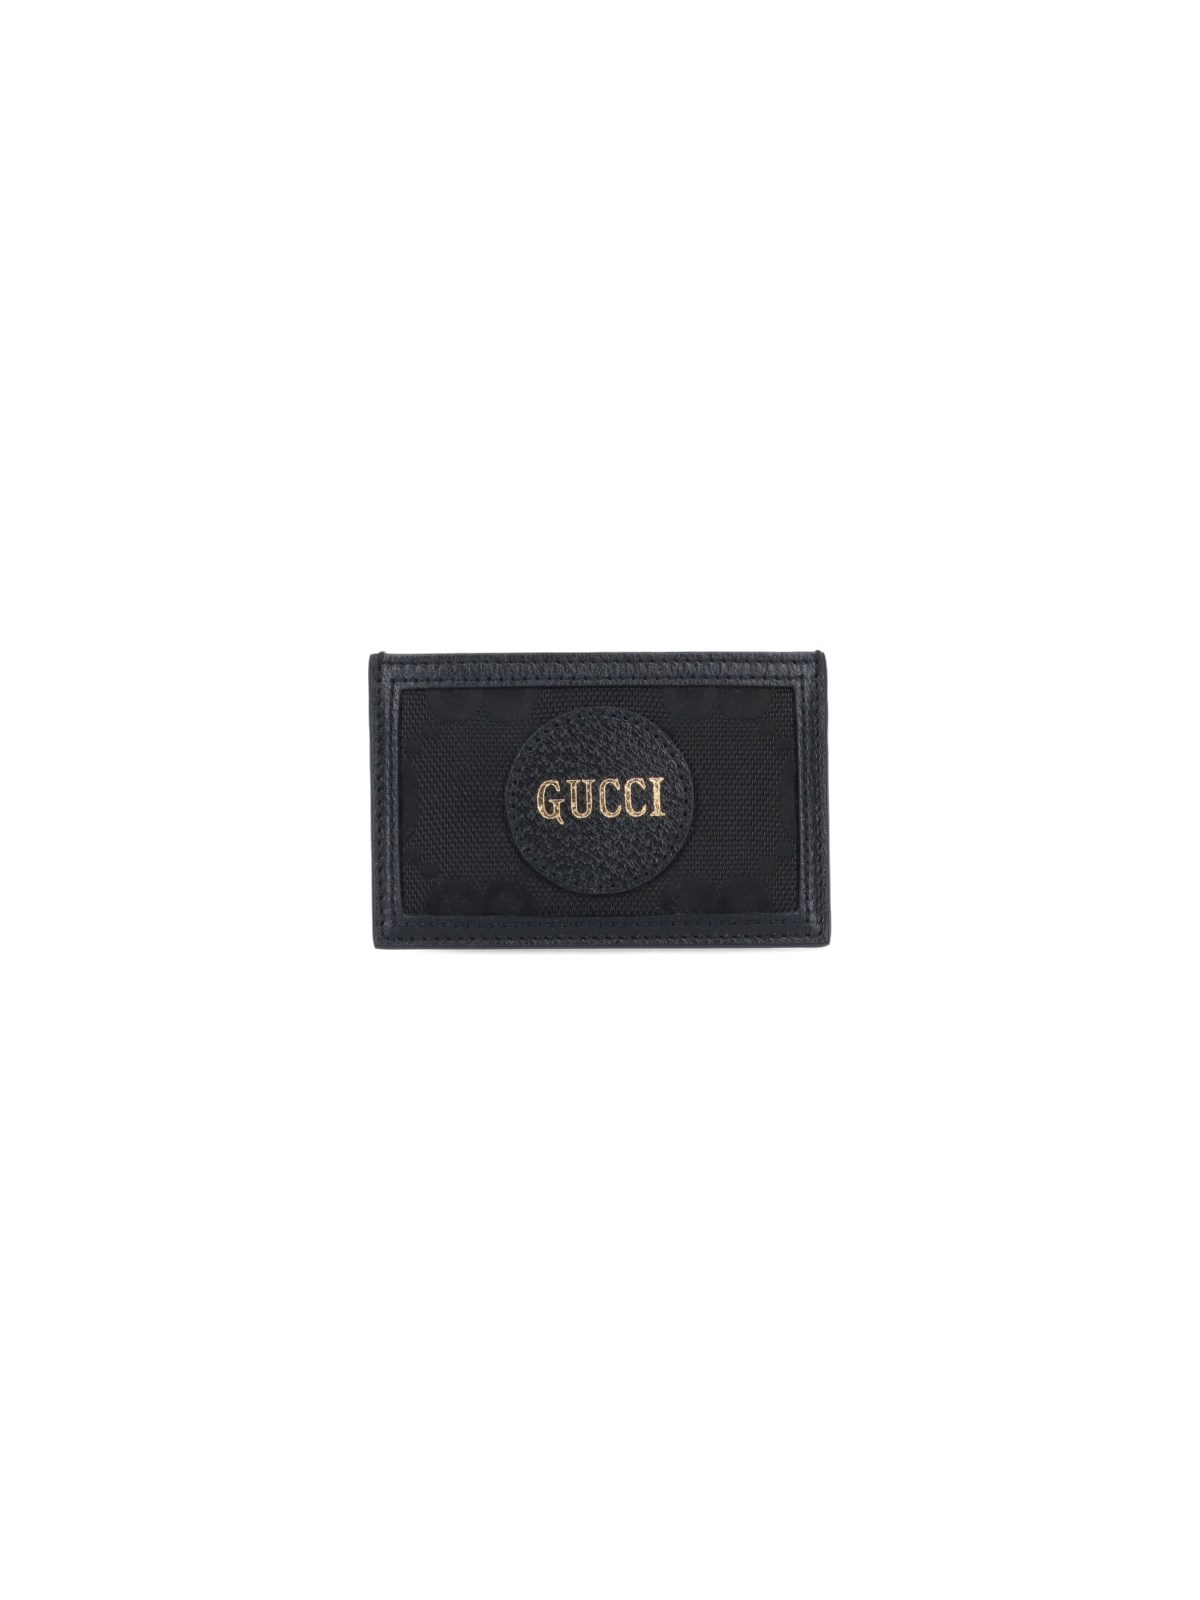 GUCCI 'OFF THE GRID' CARD HOLDER